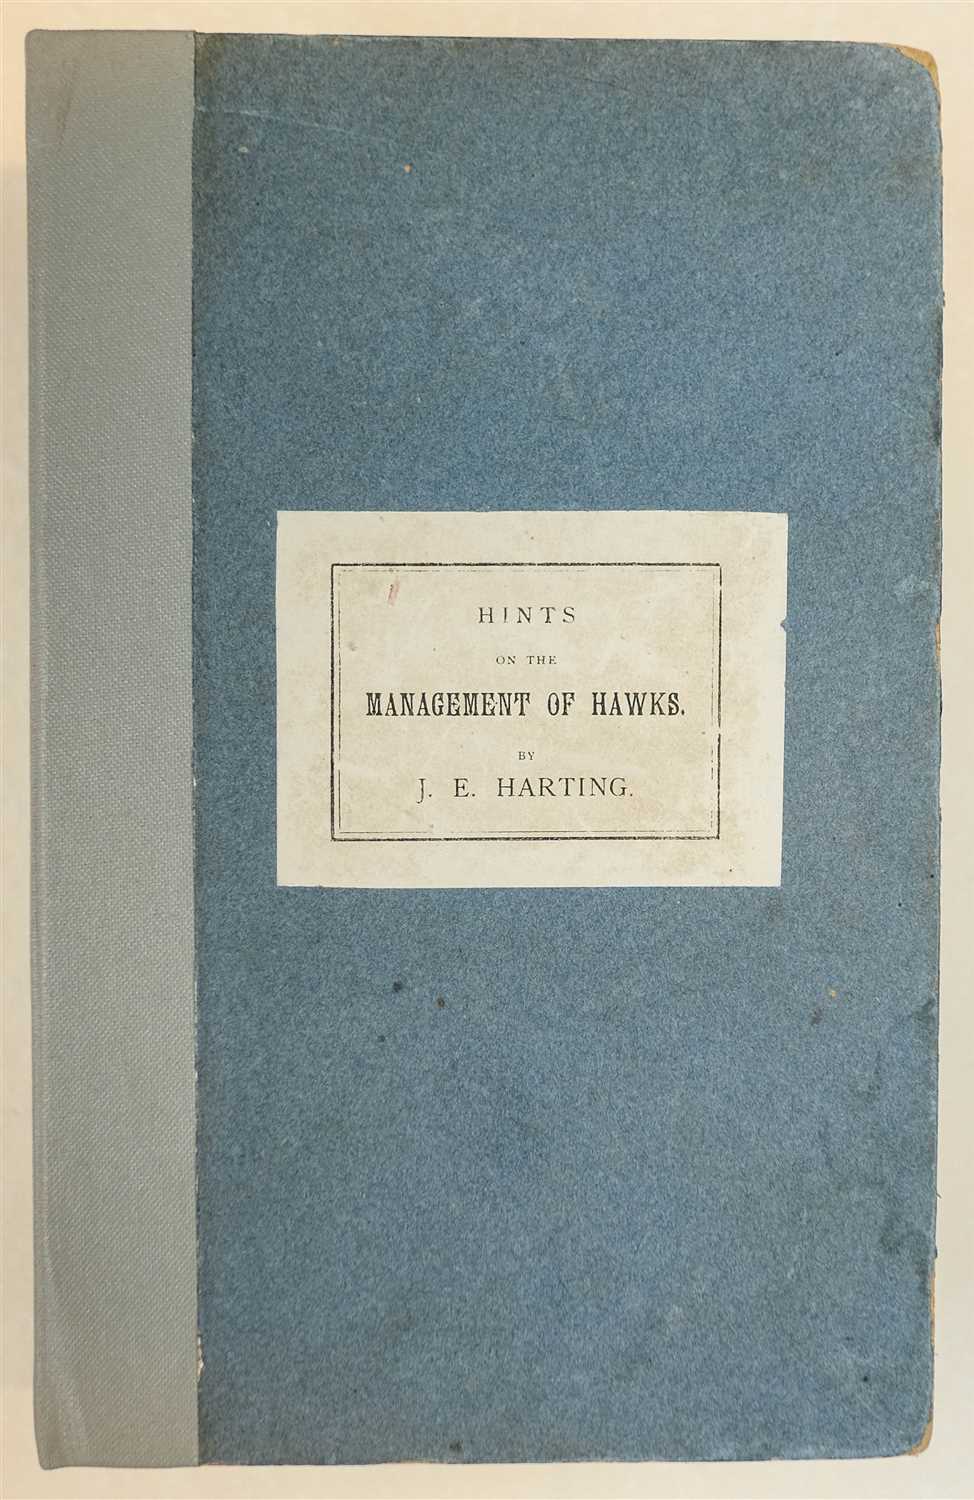 Lot 81 - Harting (James Edmund). Hints on the Management of Hawks, 1884